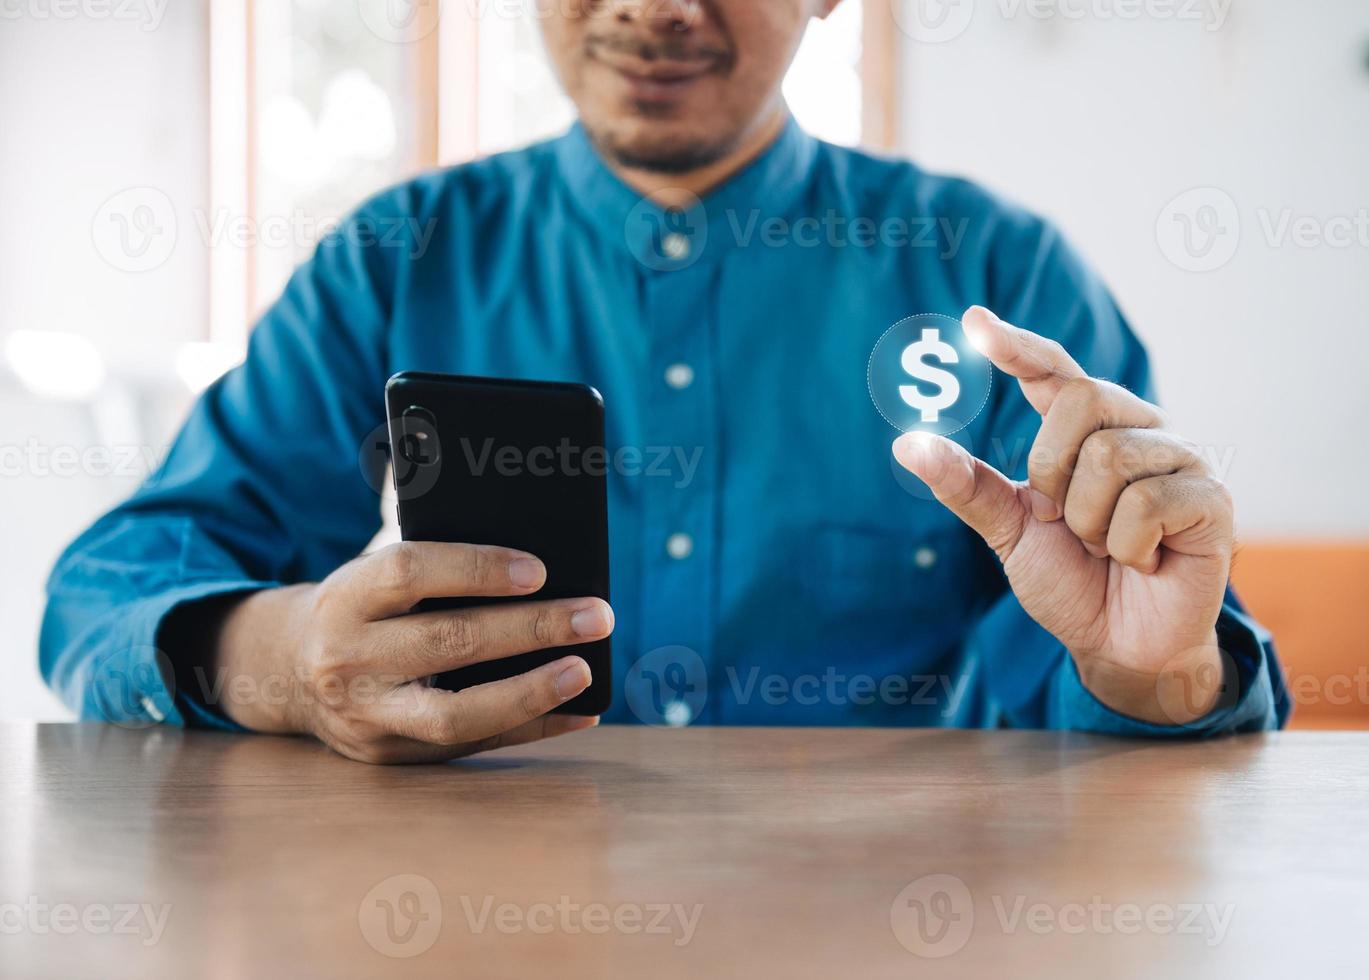 Successful international financial investment concept with business person holding glowing dollar sign growth, charts and dollar sign, digital technology photo